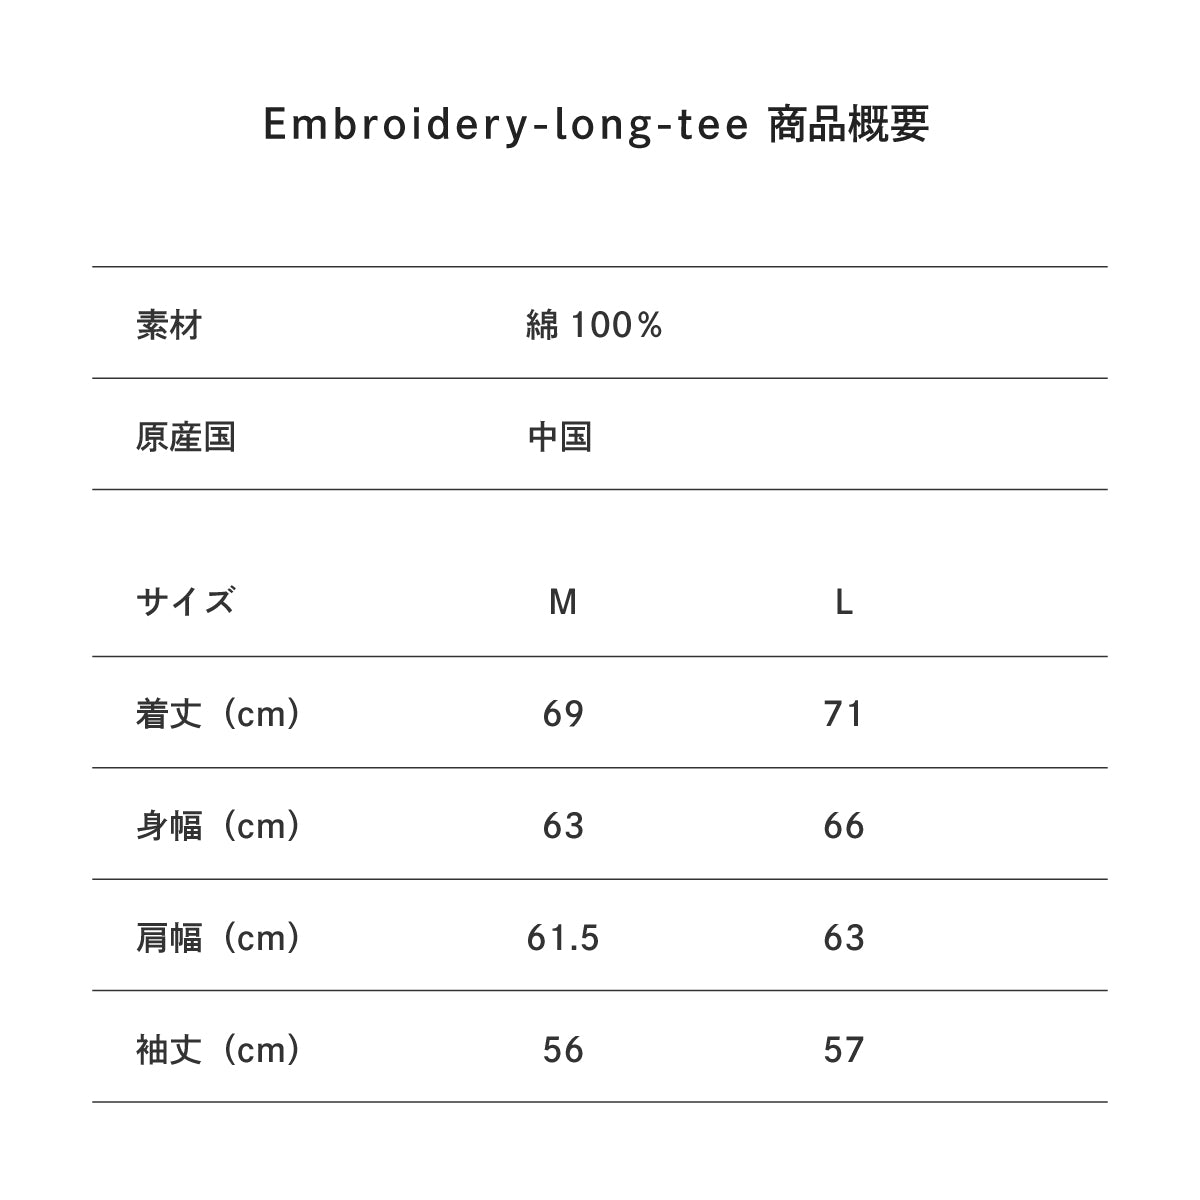 Embroidery-long-tee